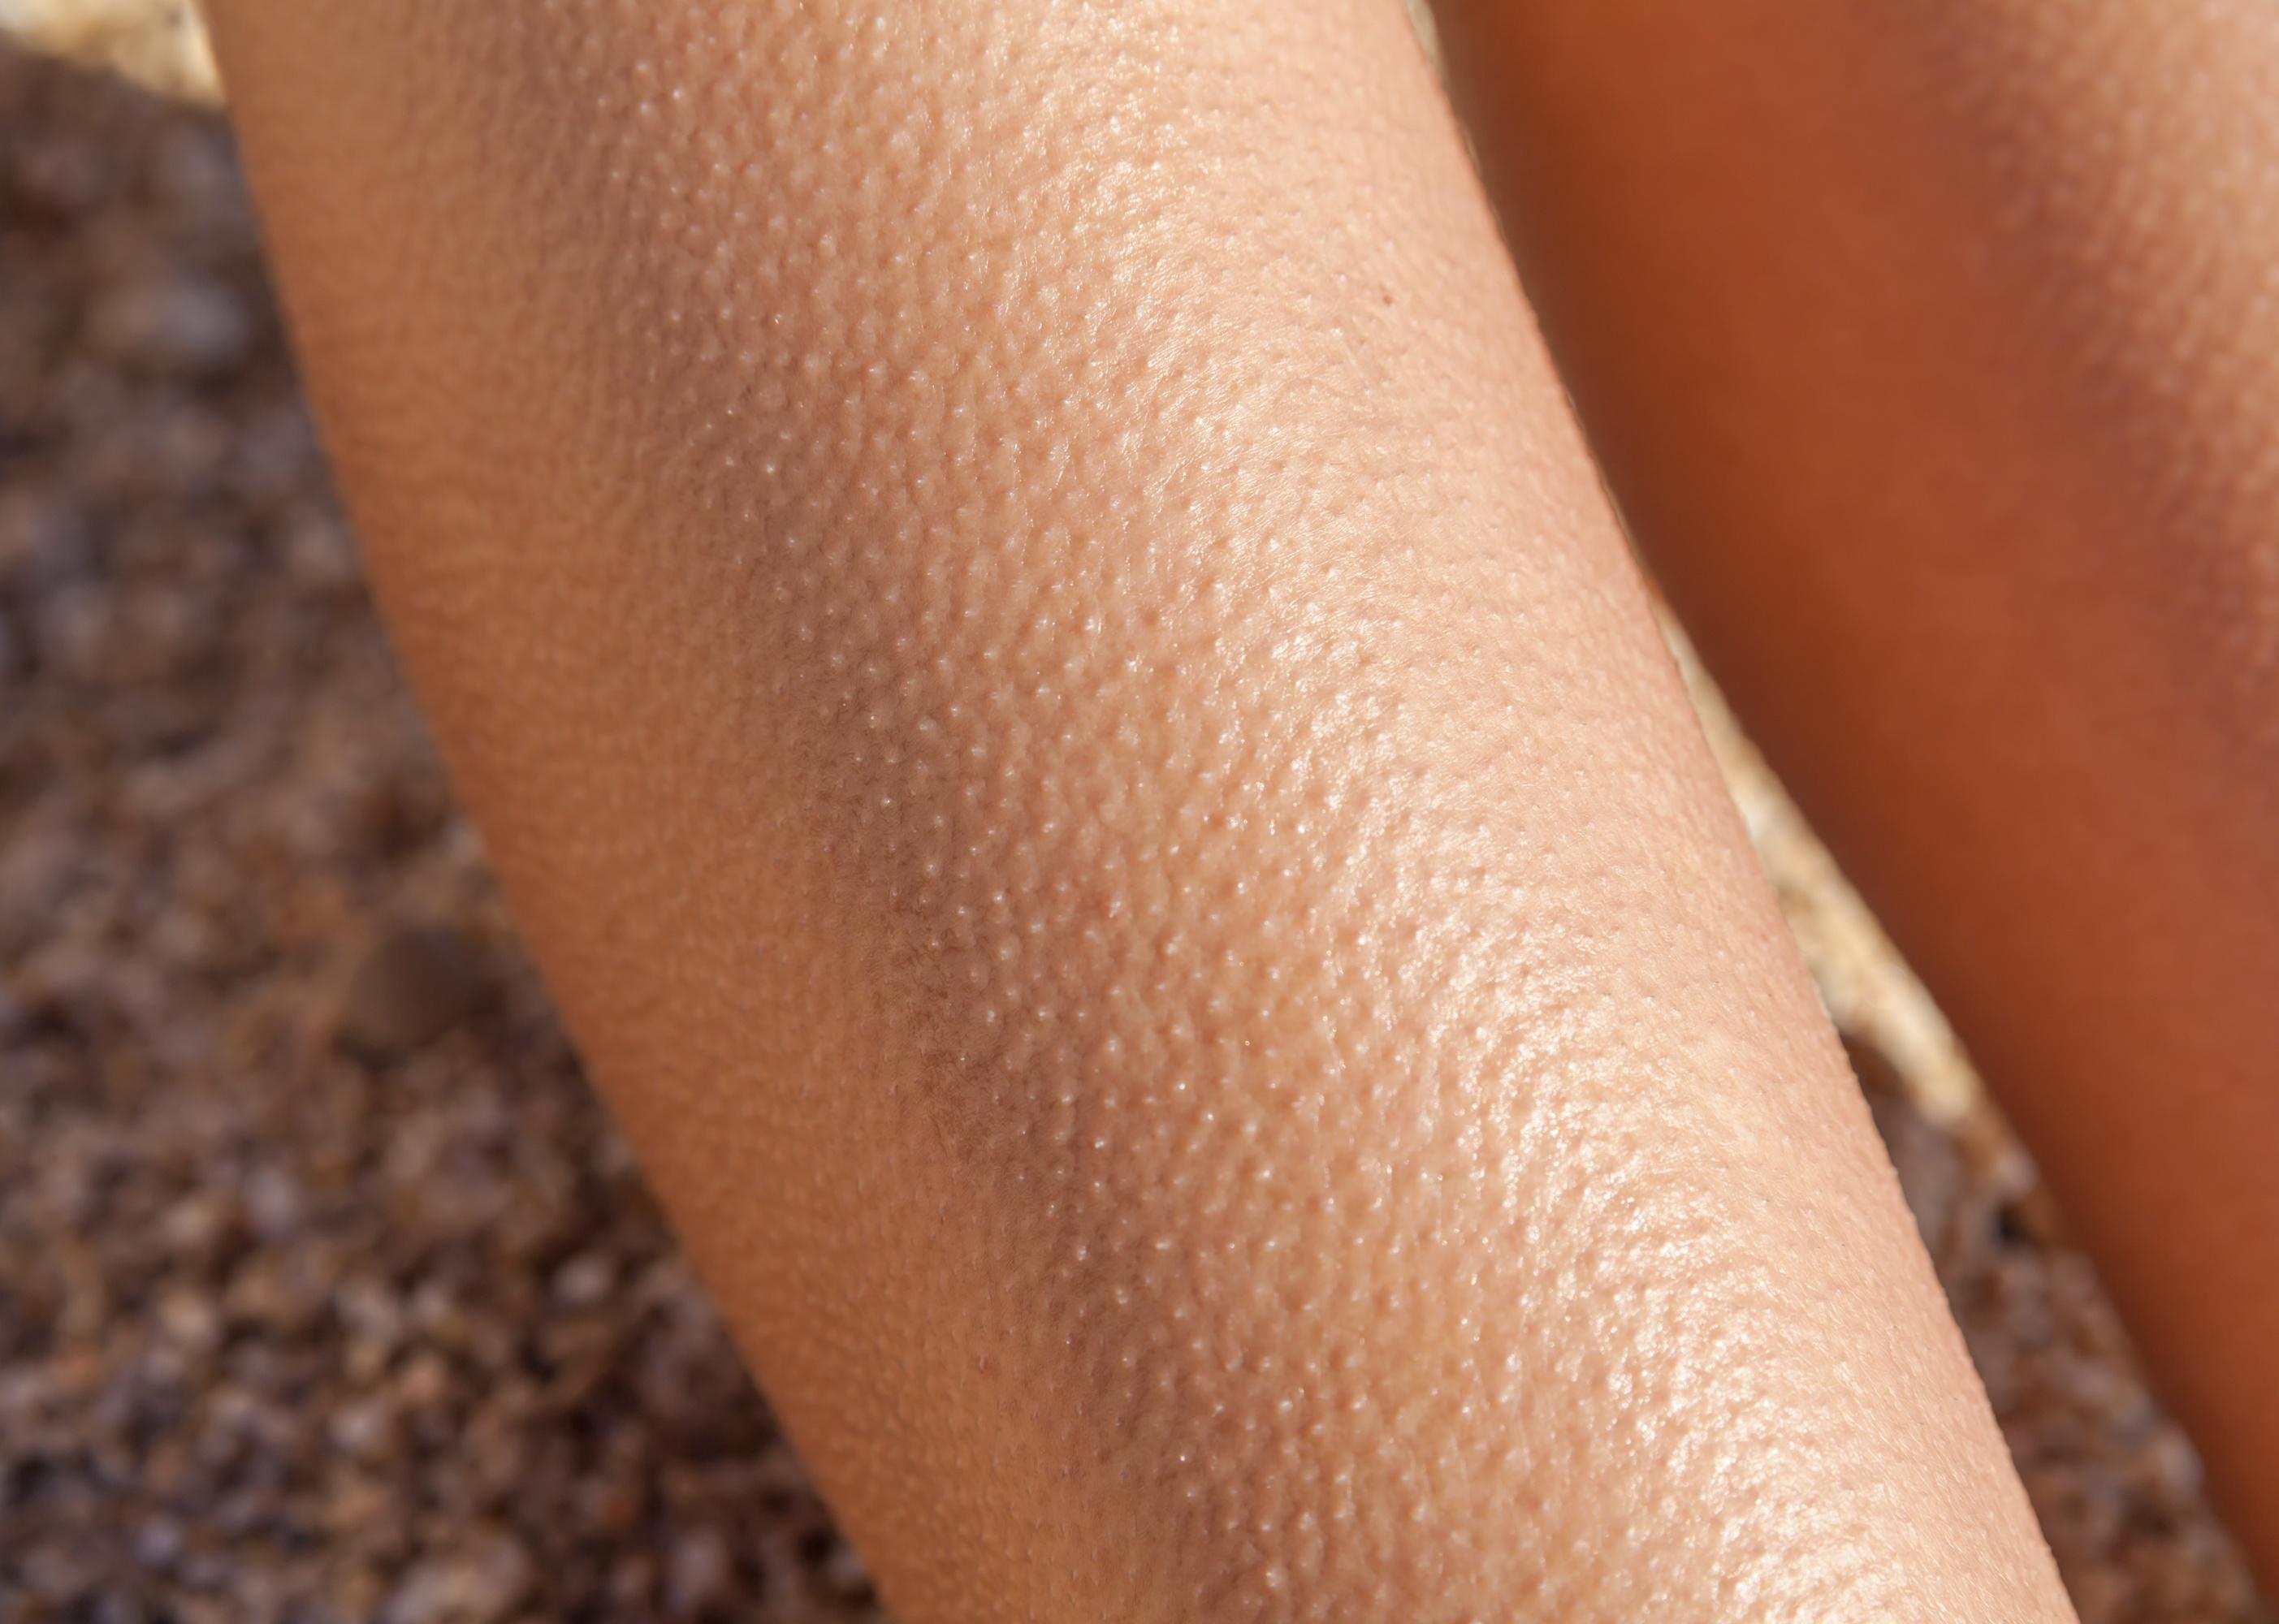 Close up of goosebumps on a persons legs.